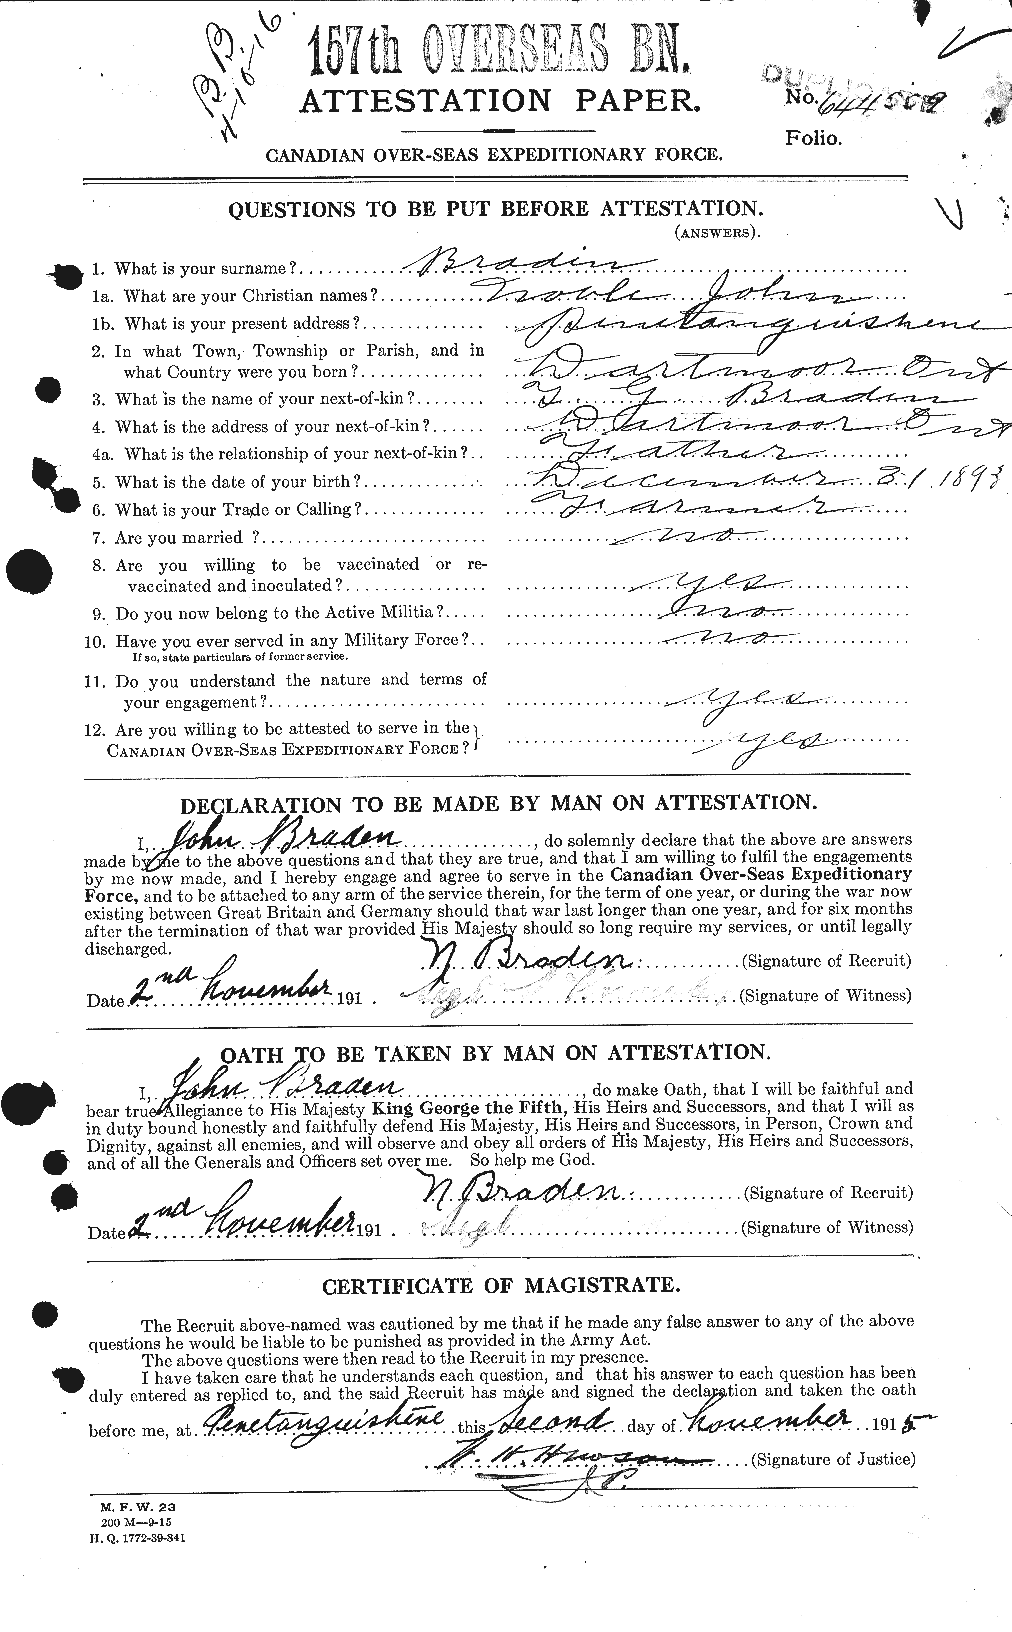 Personnel Records of the First World War - CEF 256868a